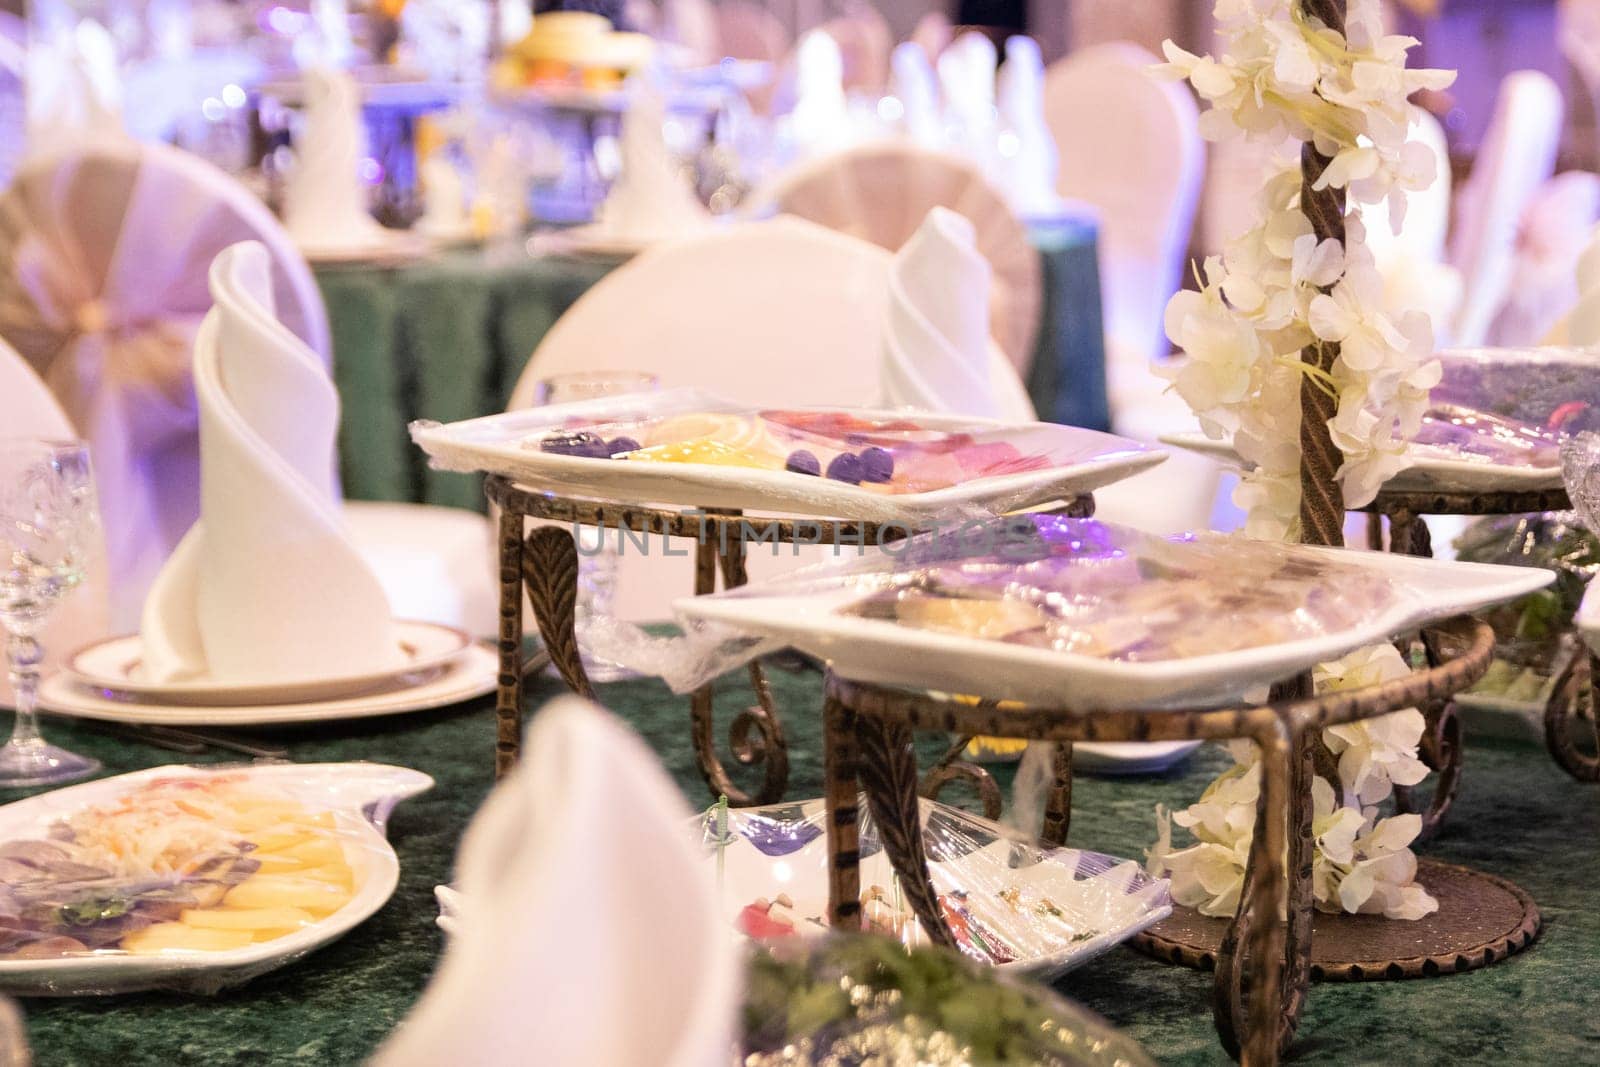 Serving a festive table on a green tablecloth before the arrival of guests in the banquet hall by Rom4ek